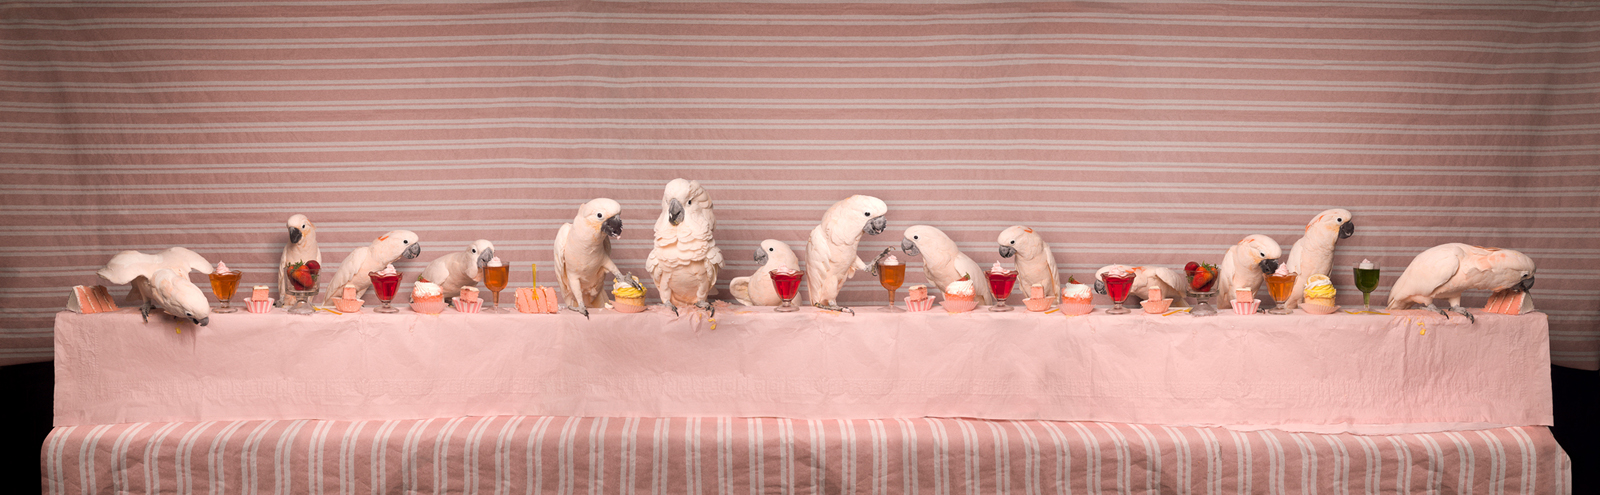  The Moluccan Cockatoo Feast  United States , 2014  10”x32” | 20”x64” | 40”x129” 